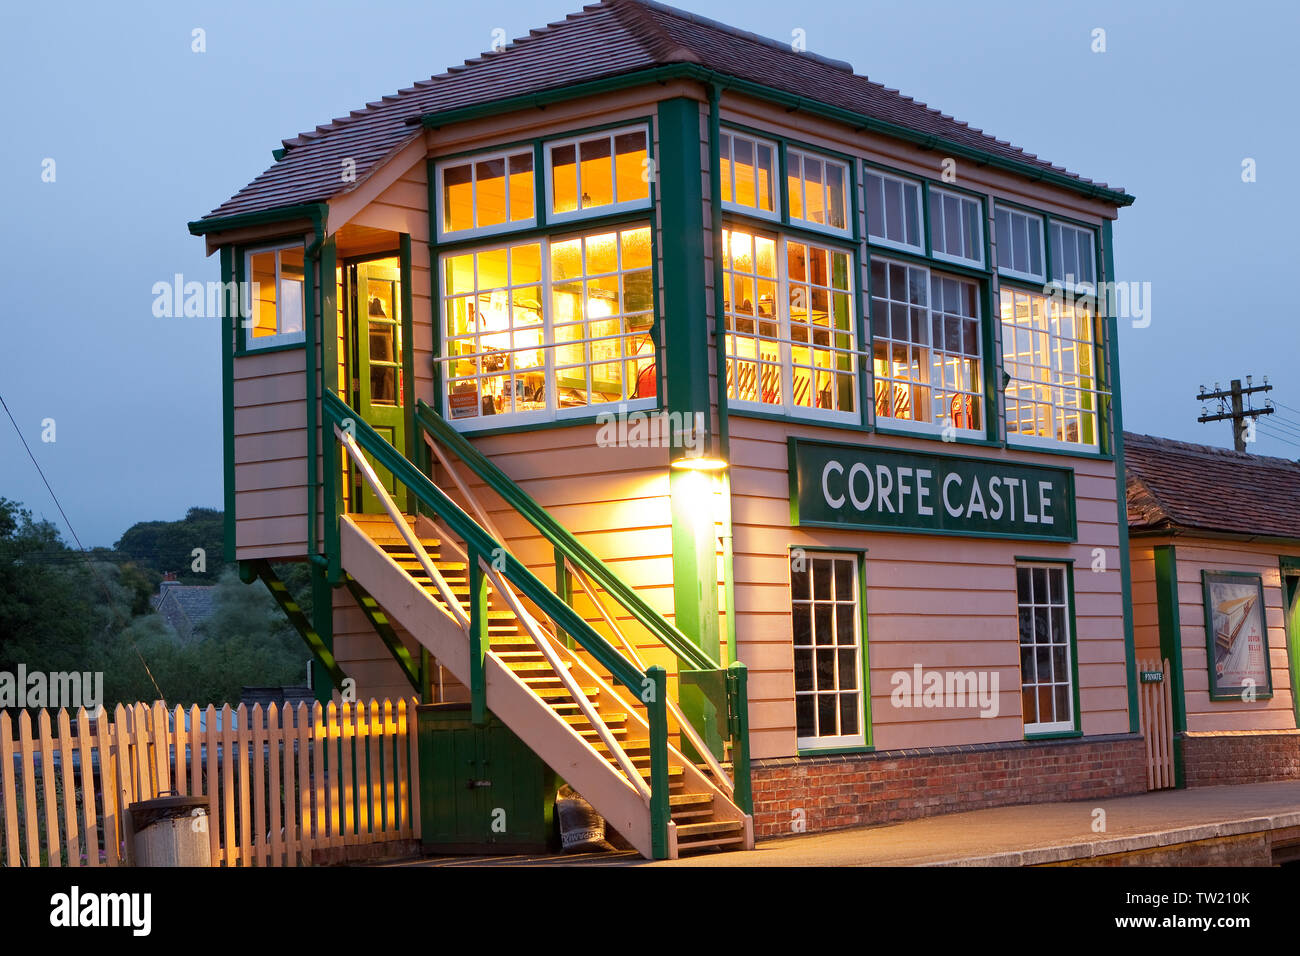 A signal box of the Swanage Steam Railway at Corfe castle in Dorset, England Stock Photo